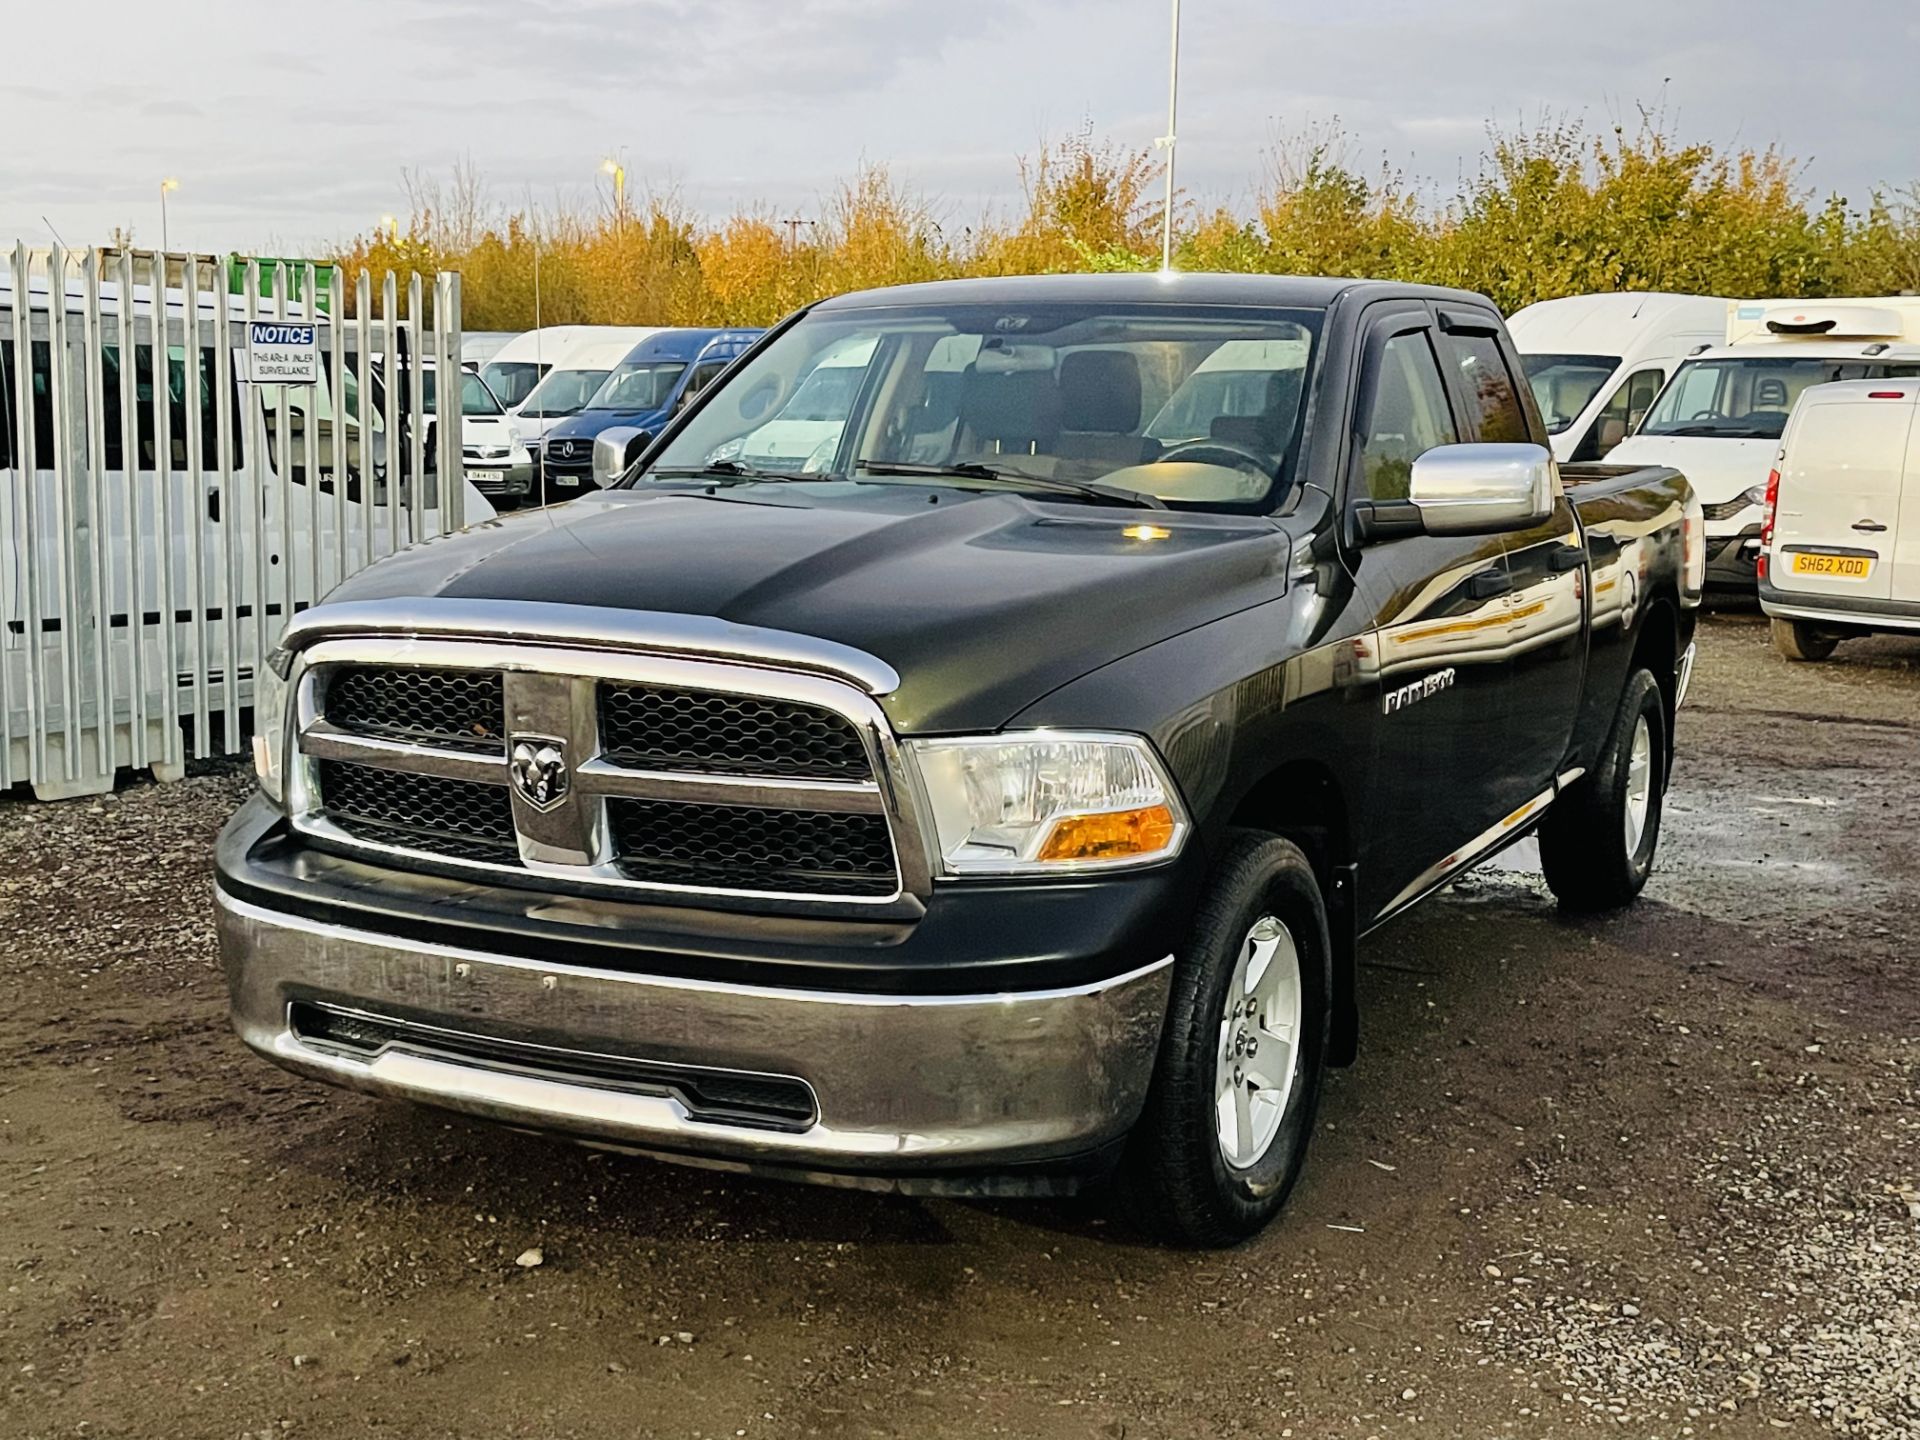 Dodge Ram 4.7 V8 1500 ST 4WD ' 2012 Year ' A/C - Cruise Control - 6 Seats - Chrome Pack - Image 2 of 27